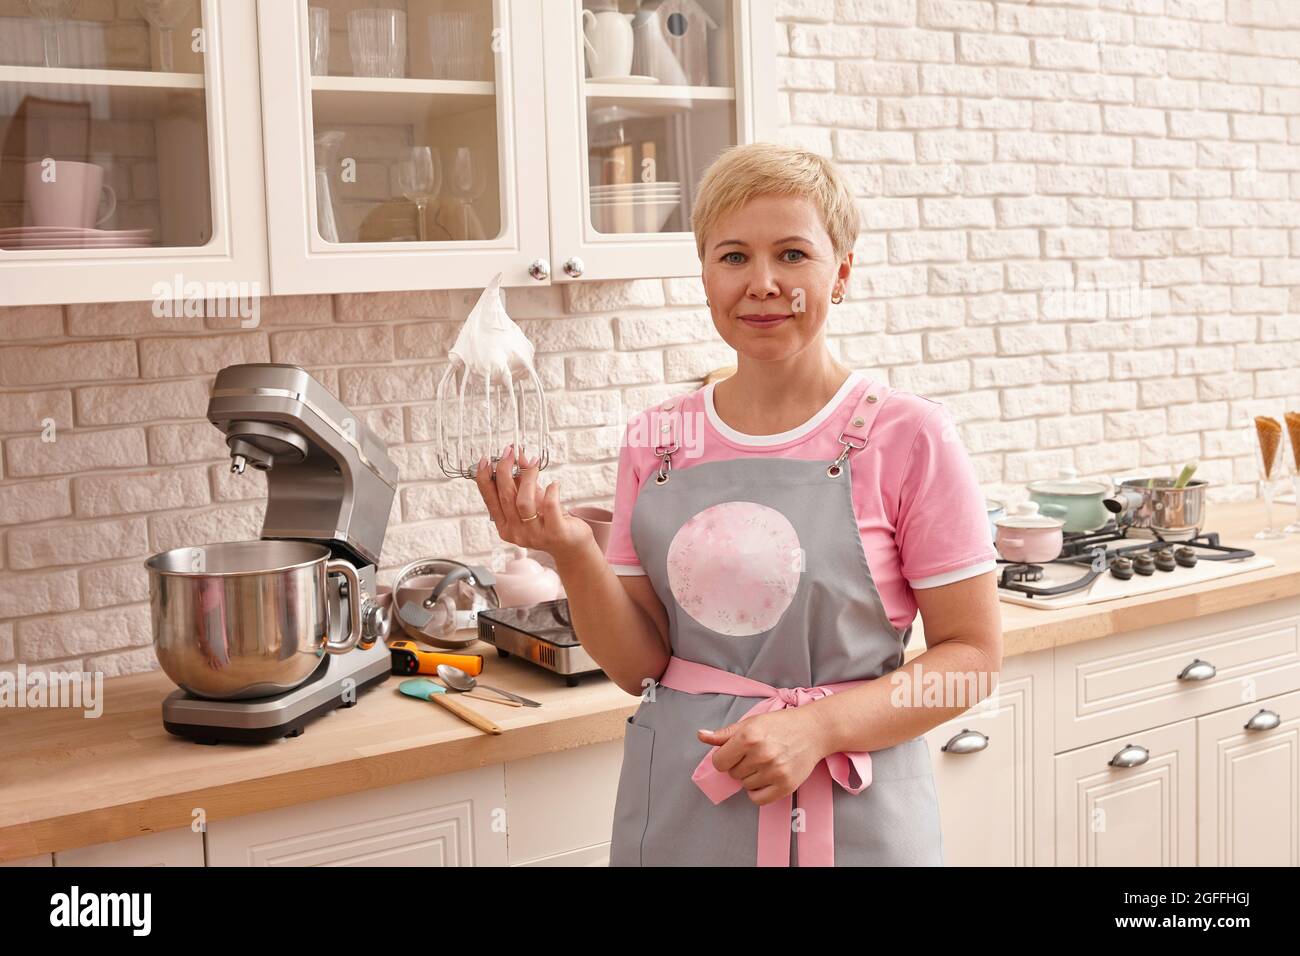 Woman confectioner making sweets in the kitchen Stock Photo